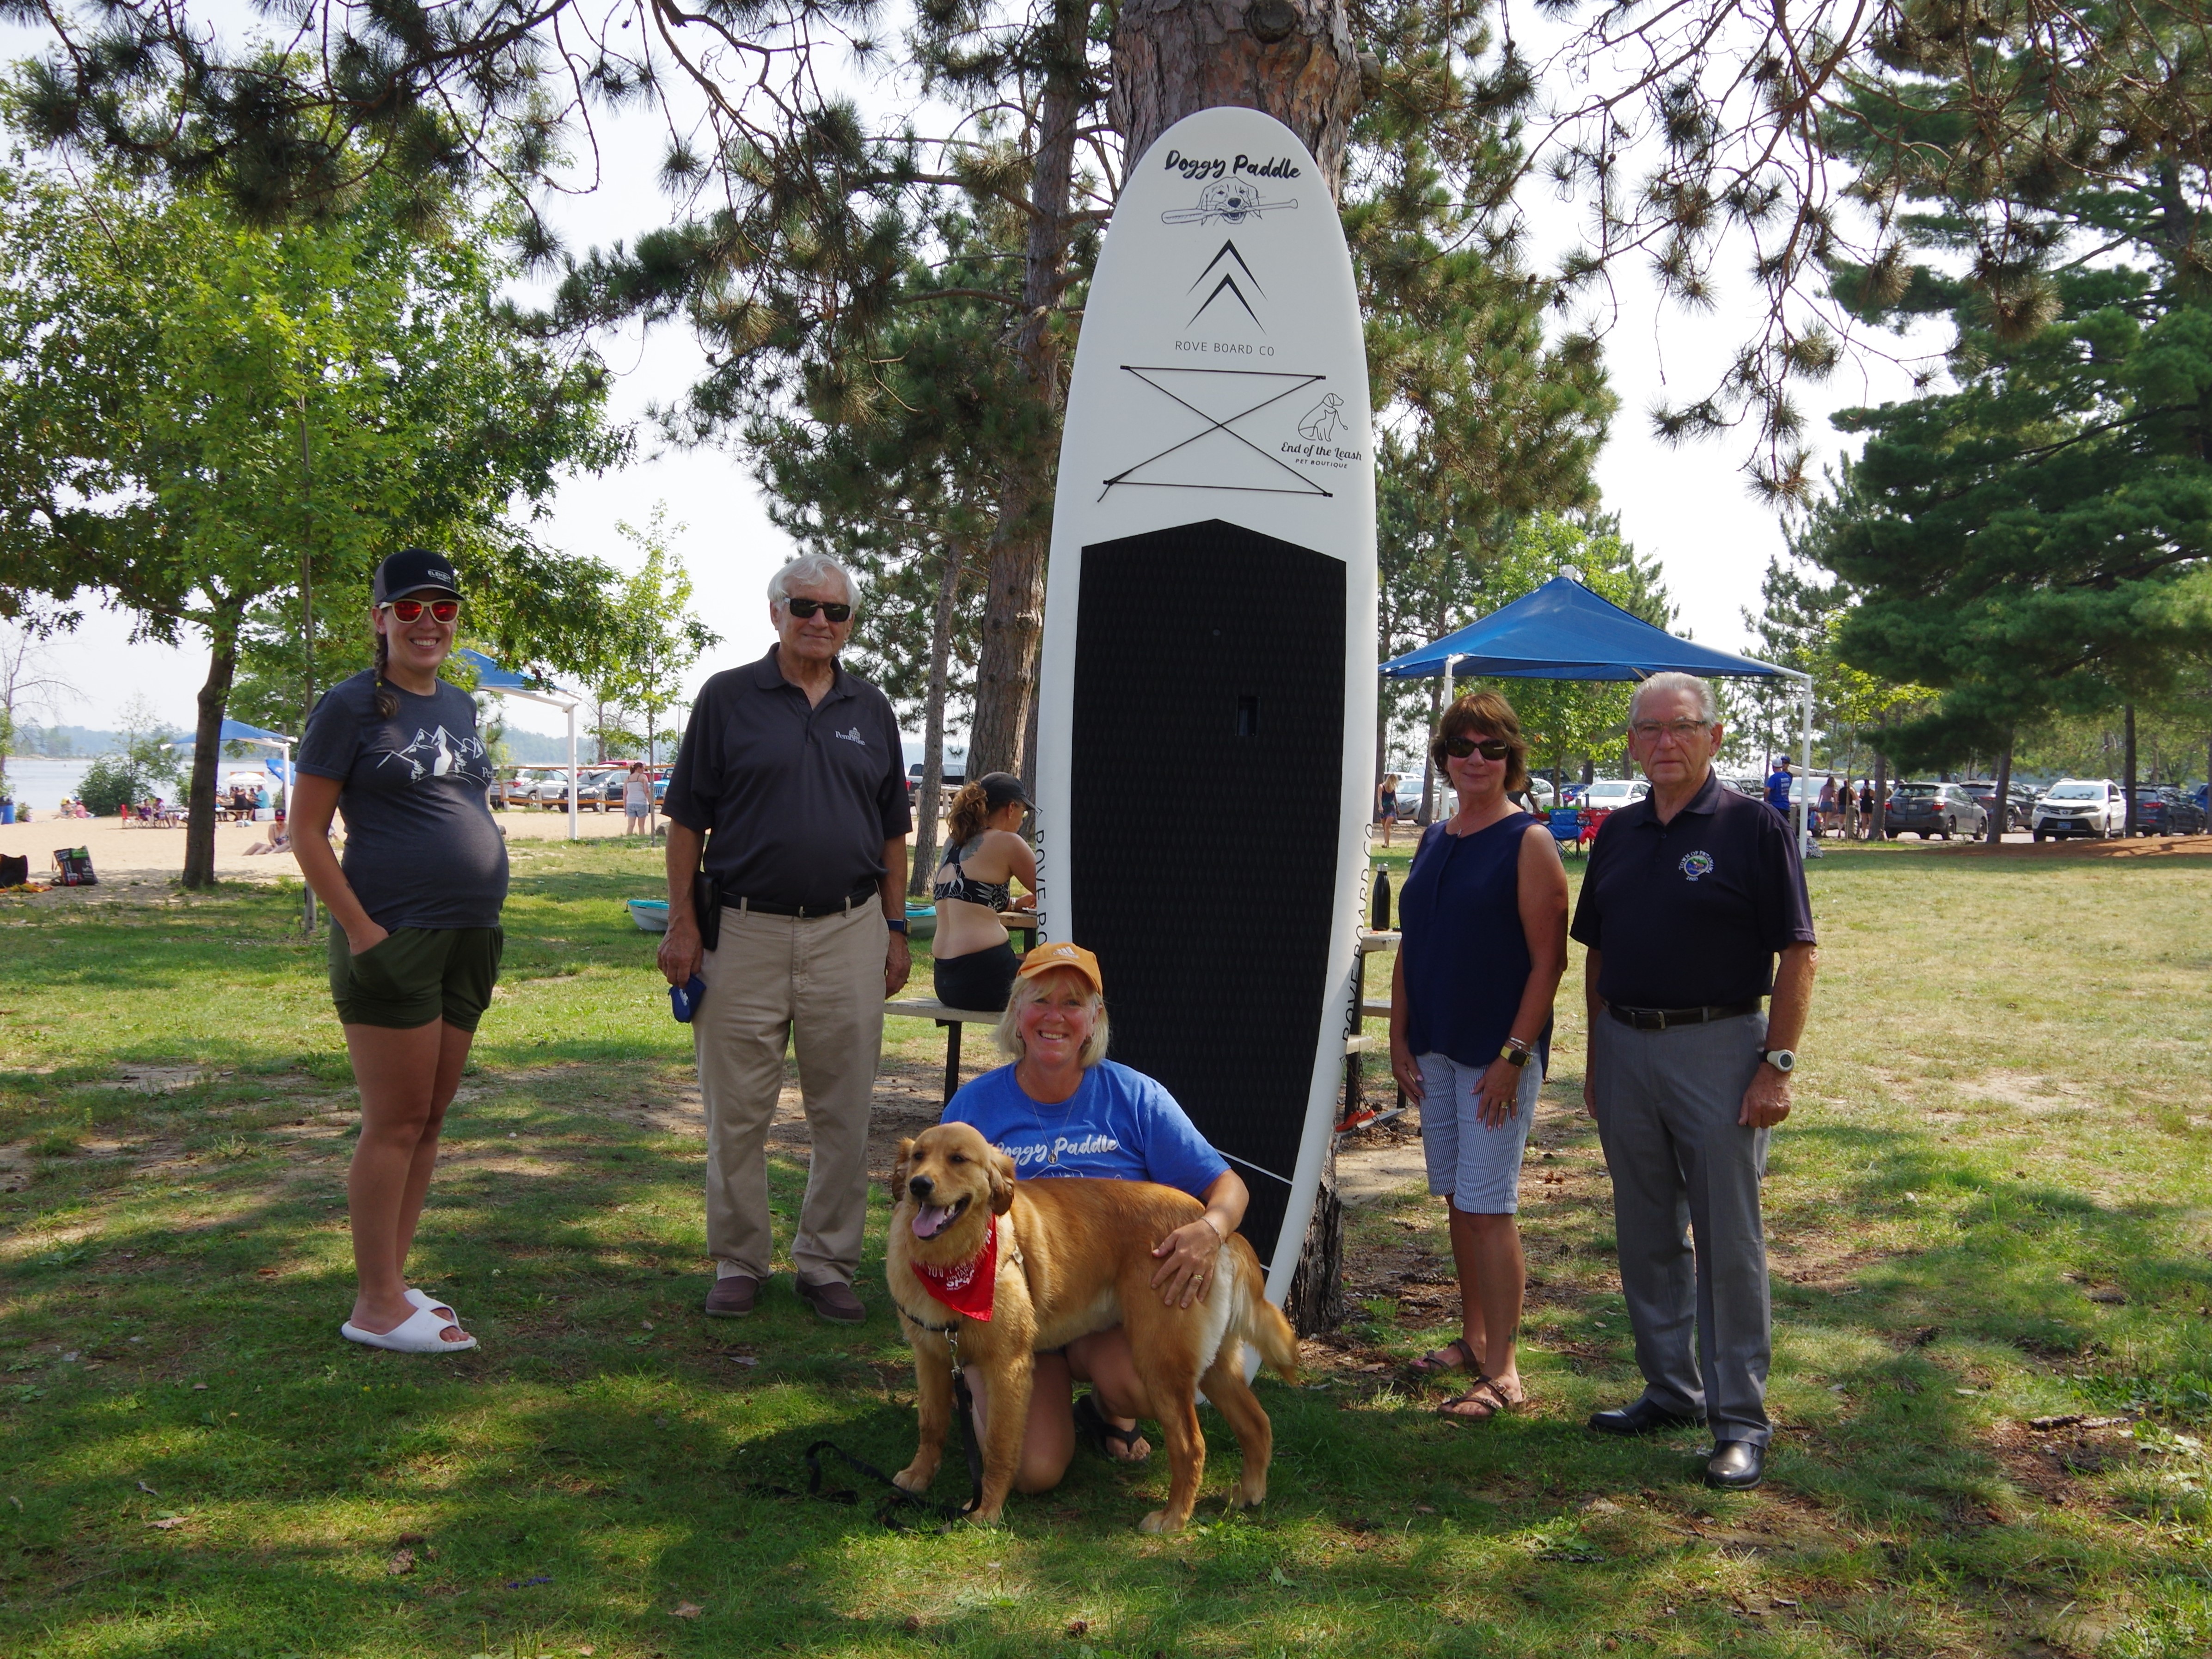 Doggy Paddle Photo with Mayor Lemay from the City of Pembroke, Reeve Robinson from the Township of Laurentian Valley, and Mayor Sweet from the Town of Petawawa.